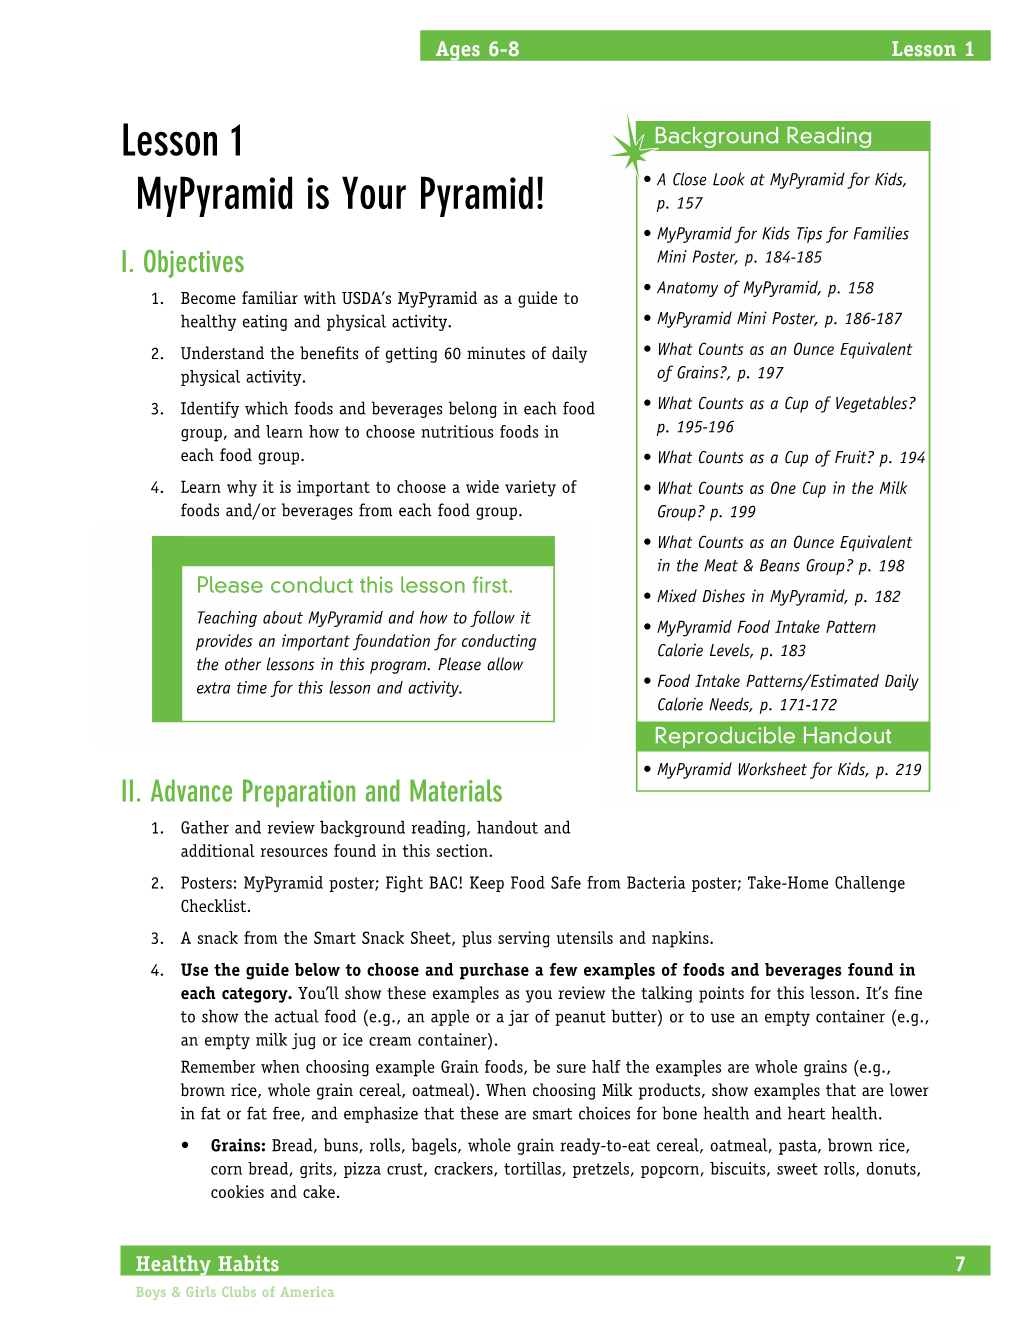 Lesson 1 Mypyramid Is Your Pyramid!